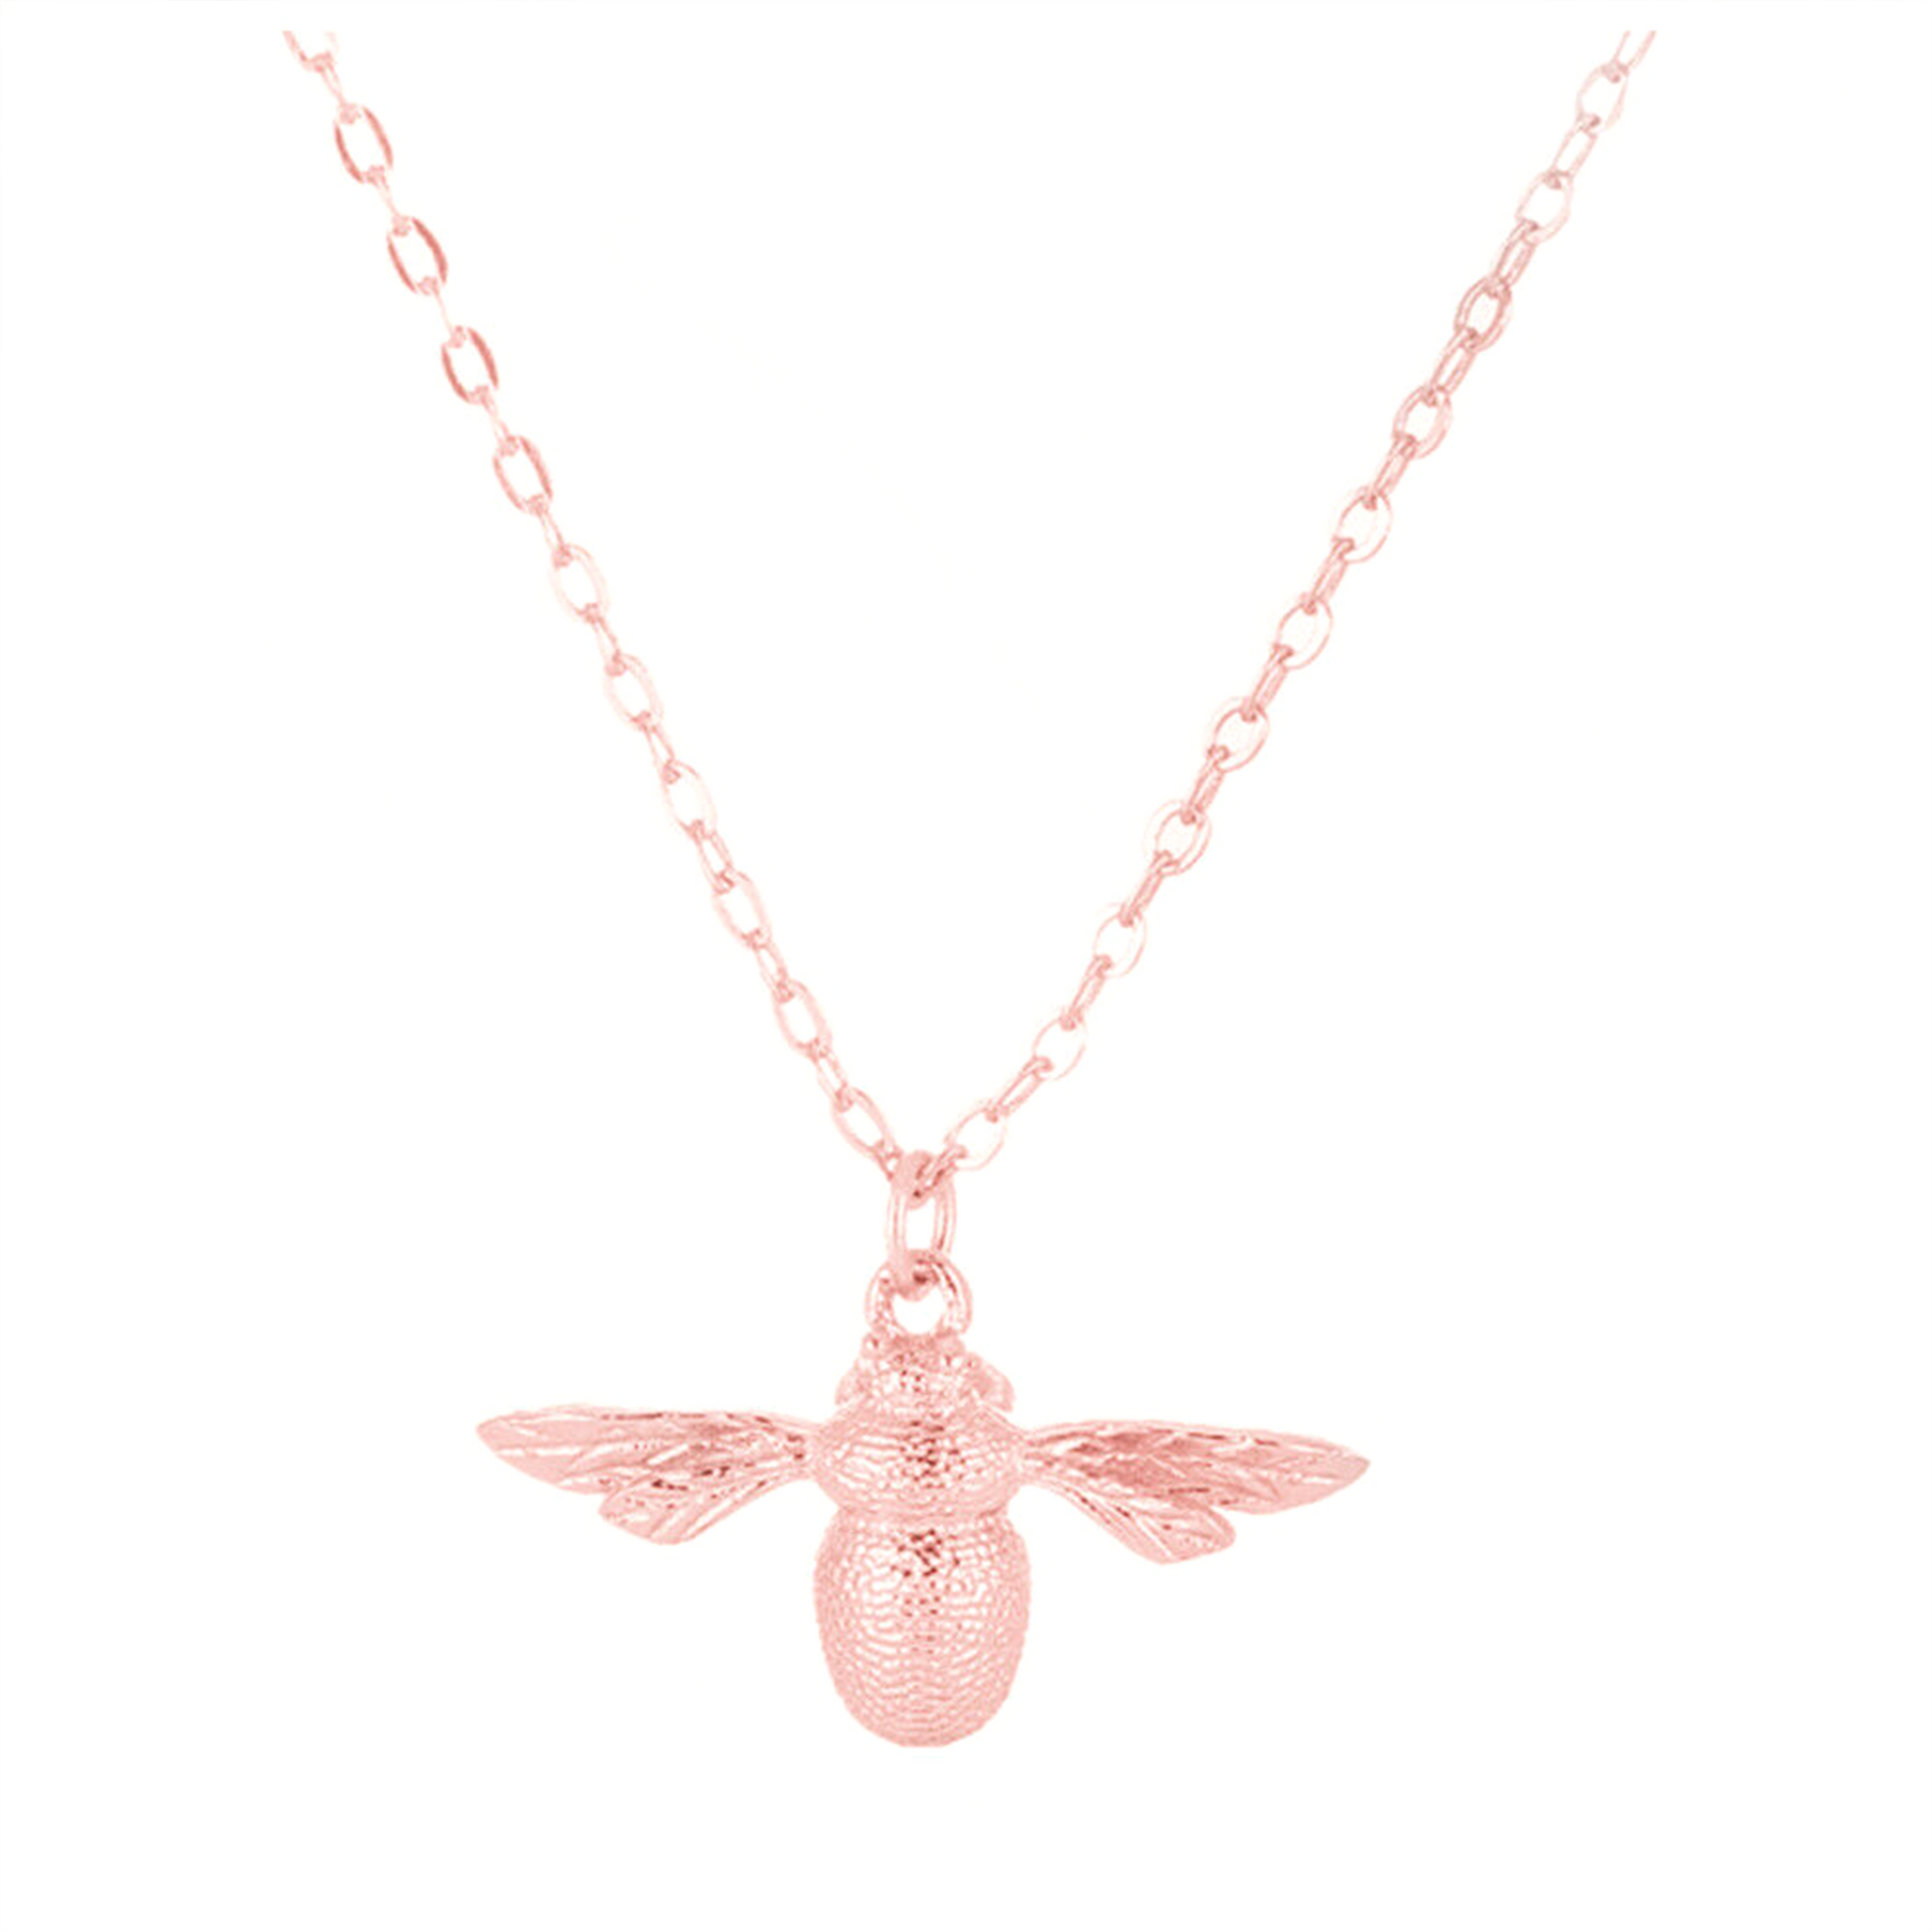 Bumble Bee Pendant Necklace in Sterling Siver , 24k Gold & Rose Gold - sugarkittenlondon